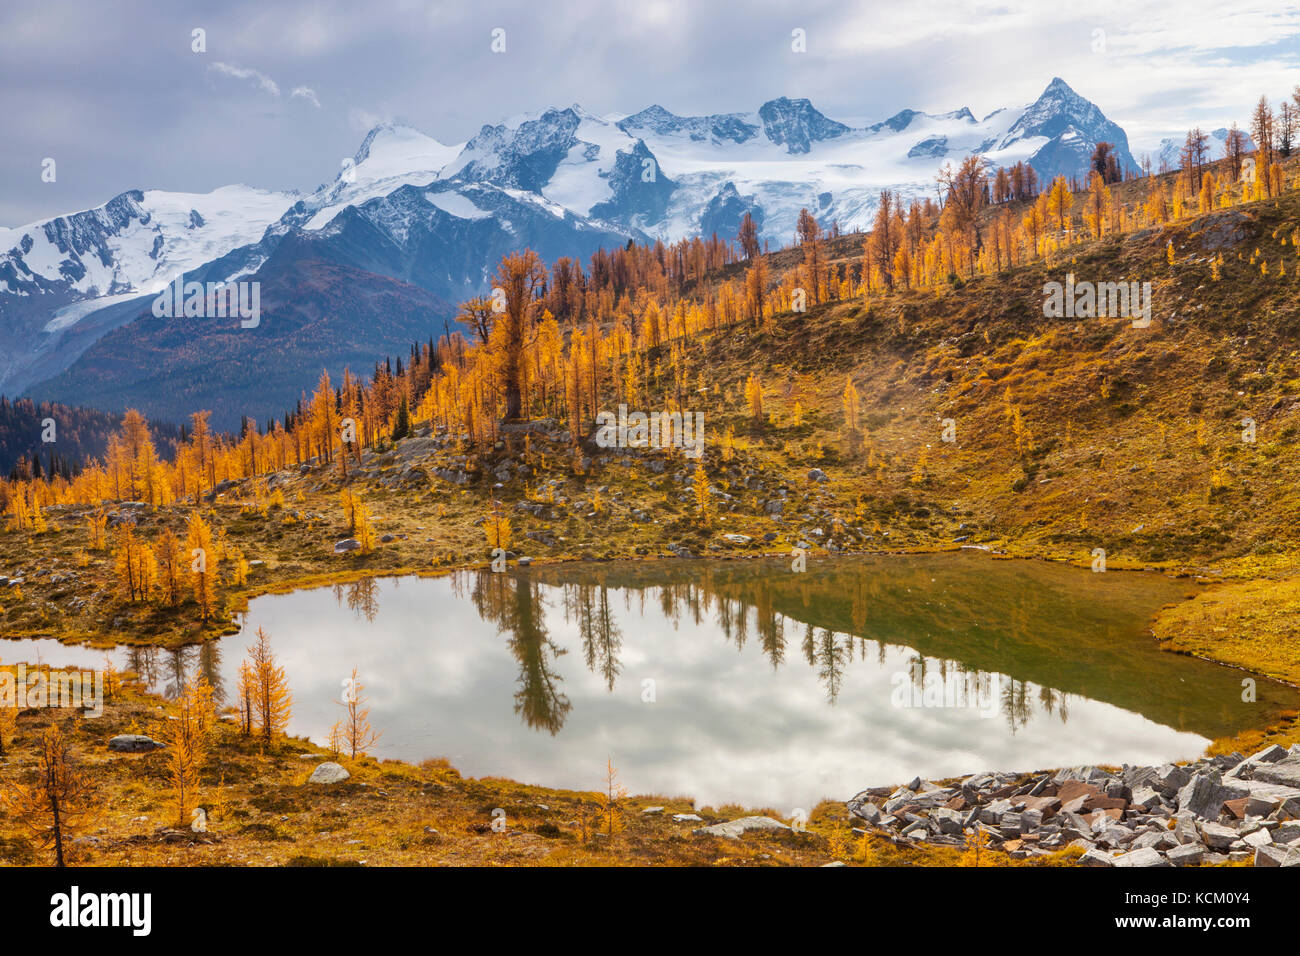 Mount Macbeth above a tarn and fall larches in Monica Meadows, Purcell Mountains, British Columbia, Canada. Stock Photo